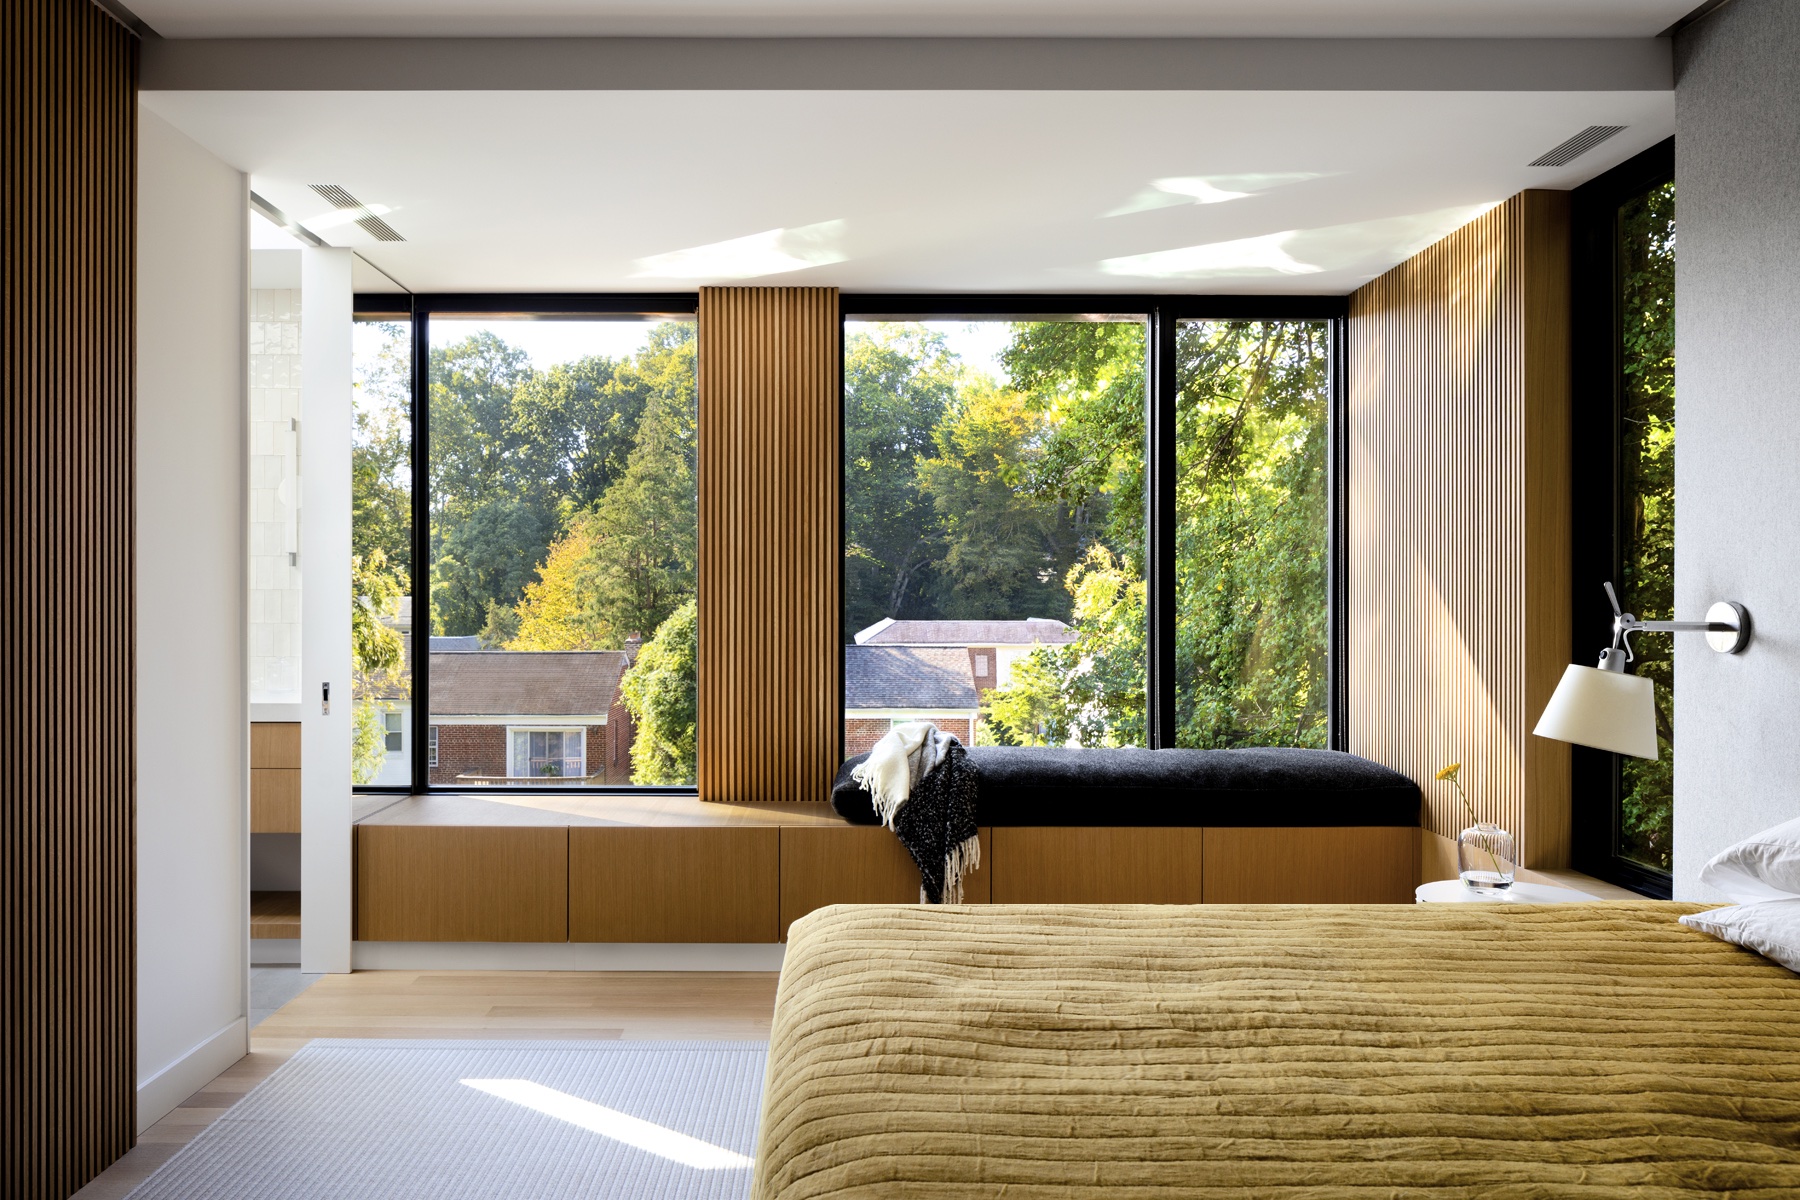 A bedroom with textured wood and views